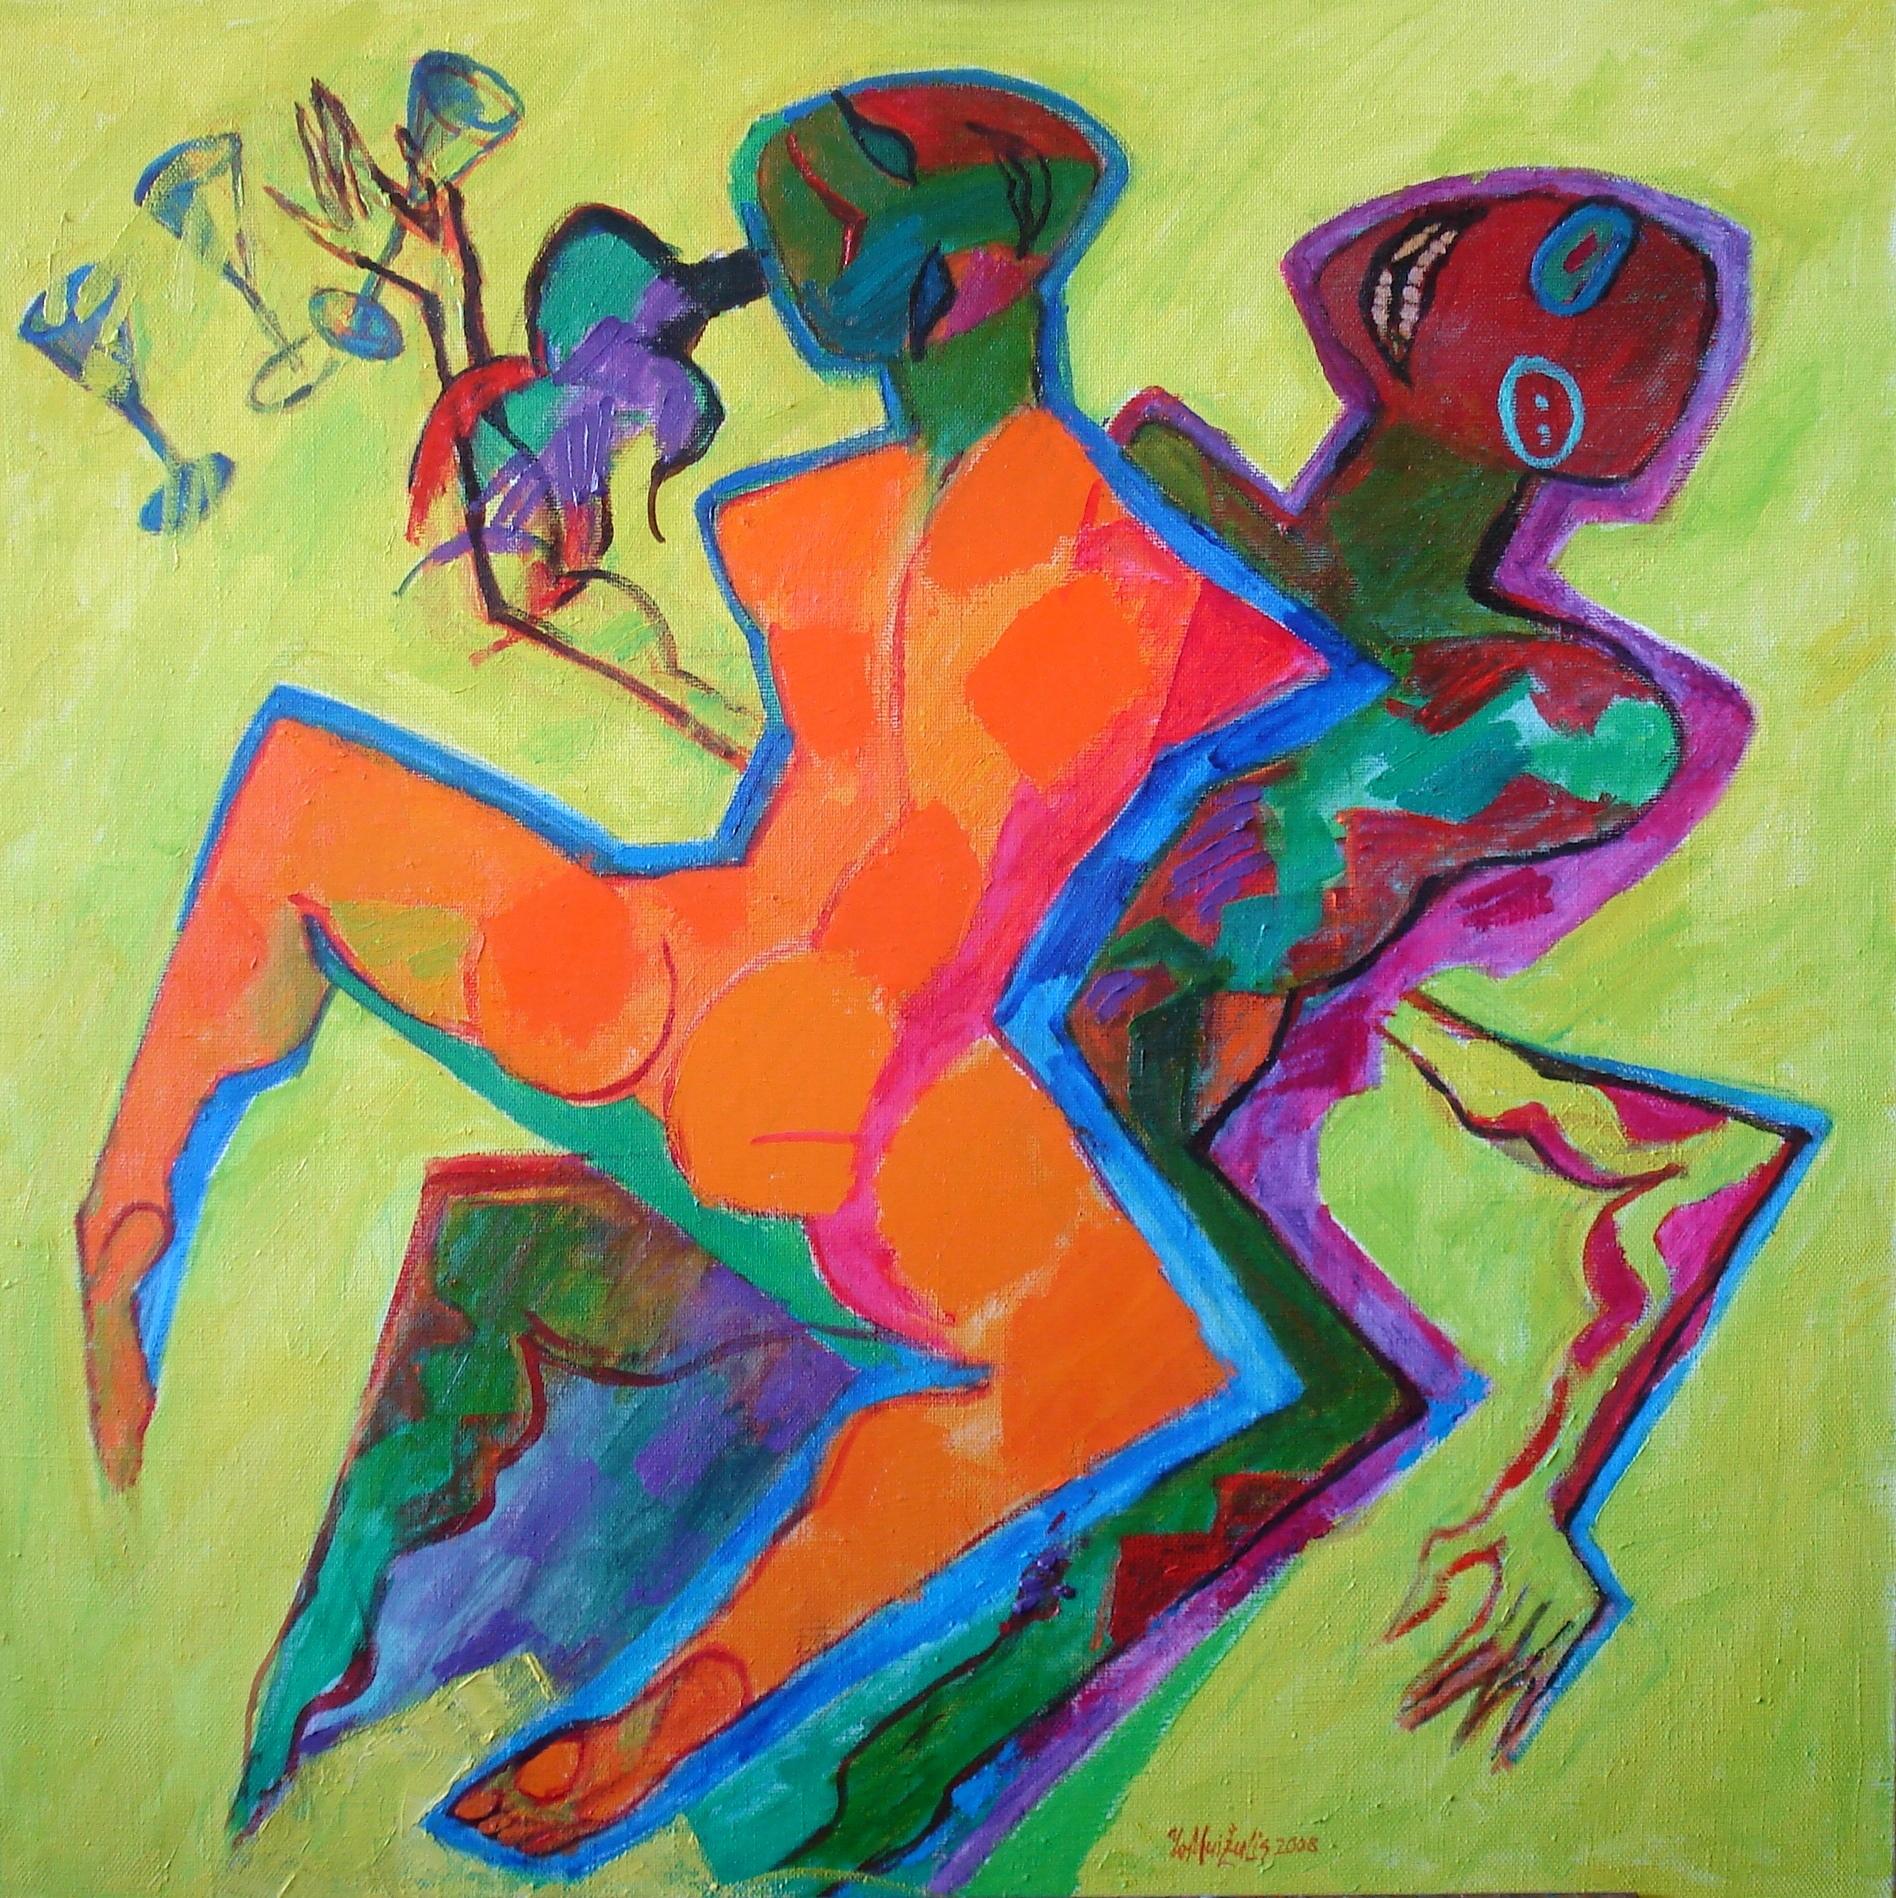 Ivars Muizulis  Abstract Painting - Joy of life. 2008., oil on canvas, 100x100 cm